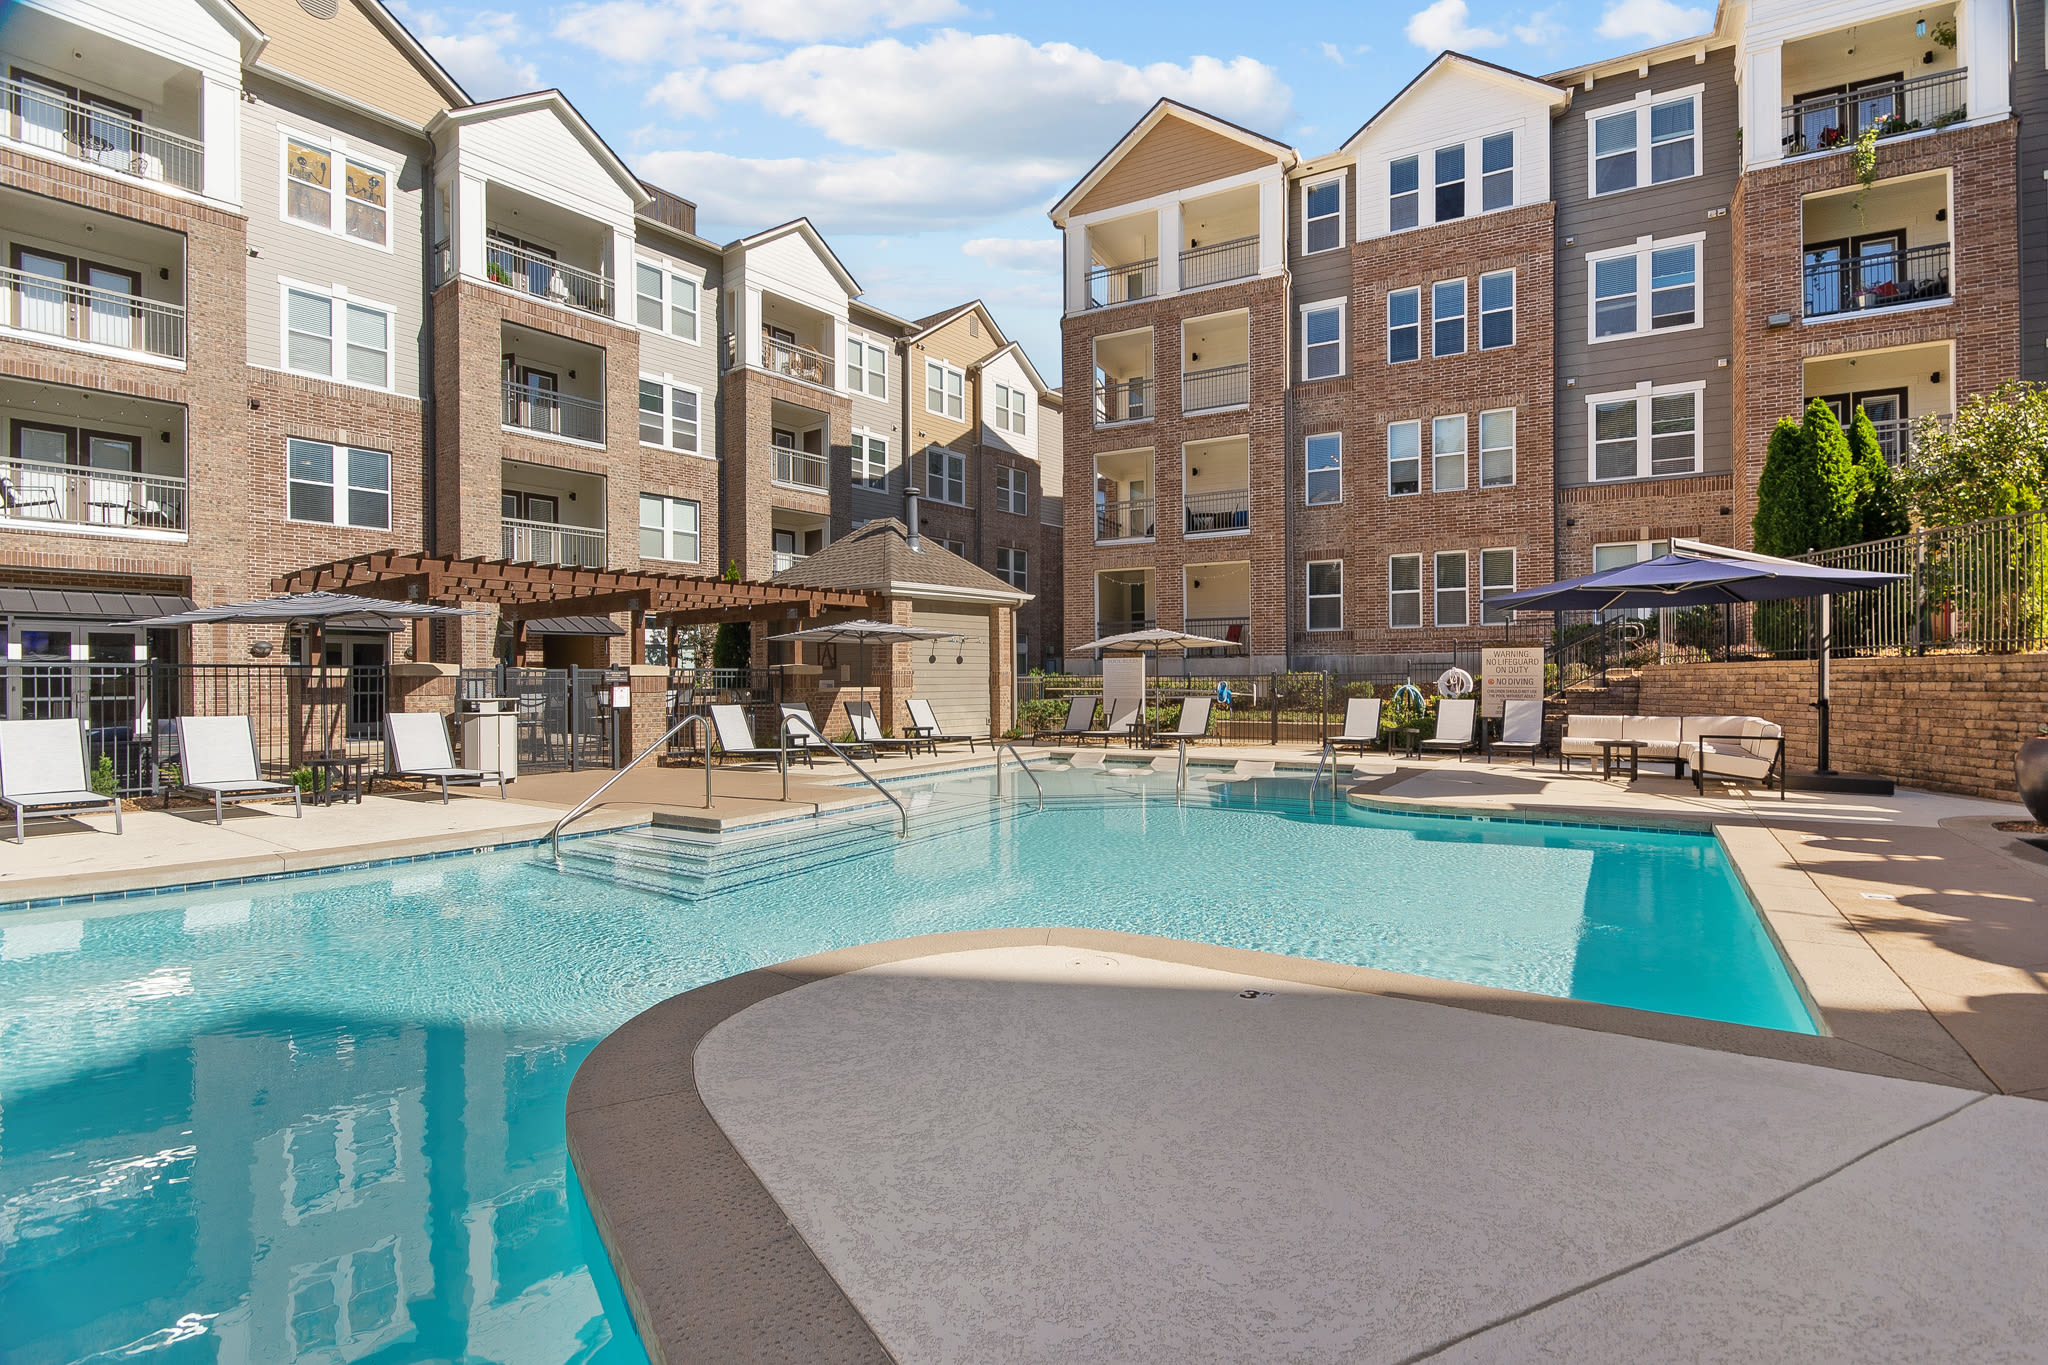 Resort-style swimming pool with sundeck lounge chairs at Artessa in Franklin, Tennessee